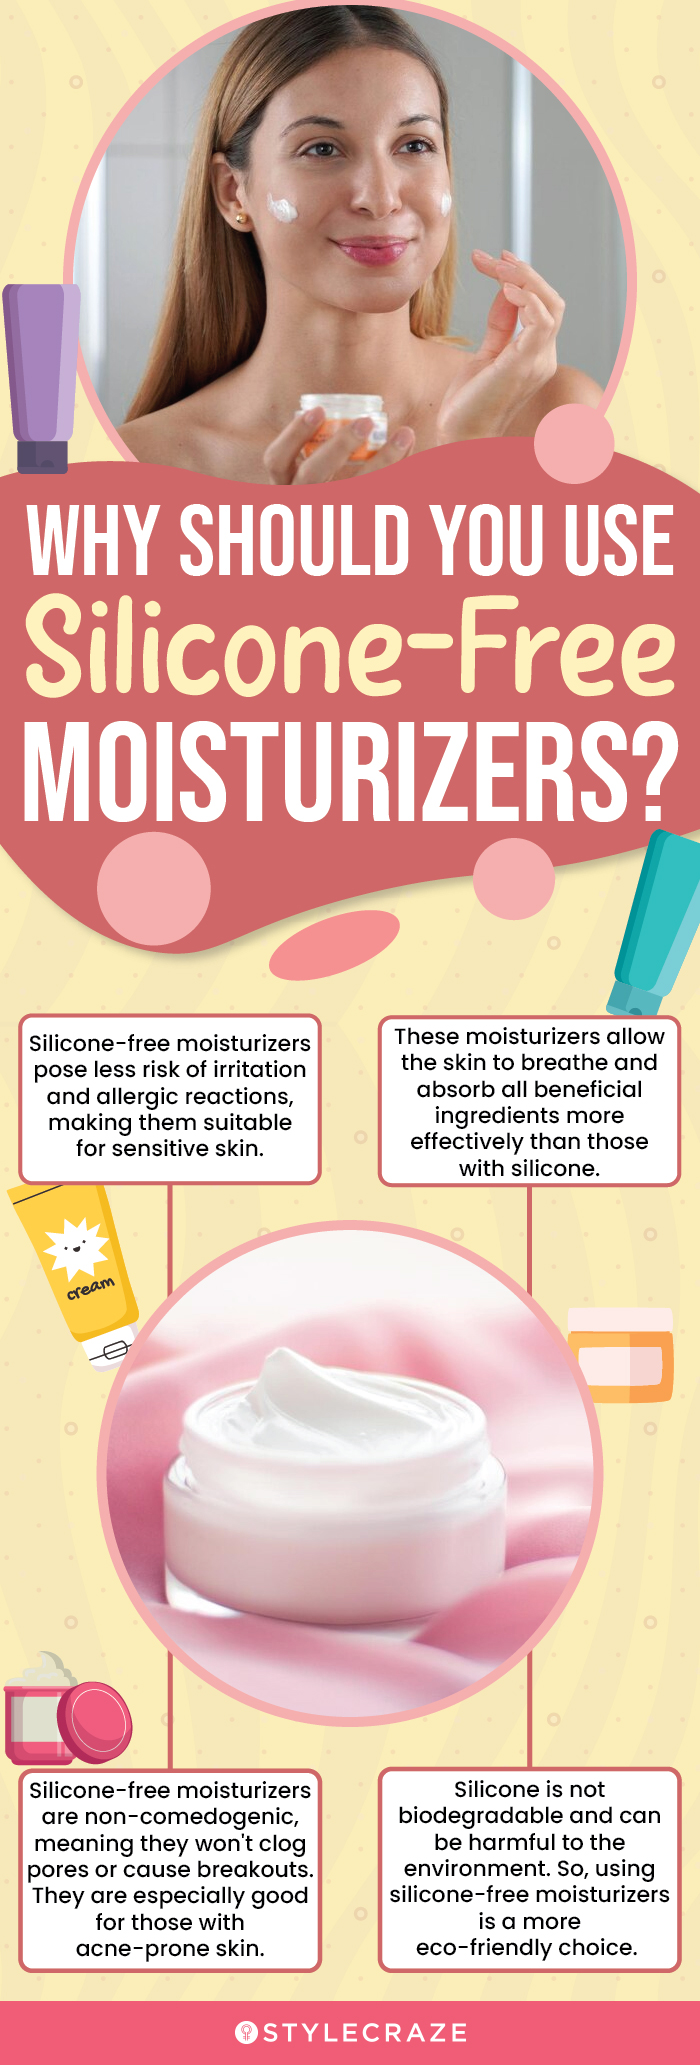 Why Should You Use Silicone-Free Moisturizers? (infographic)